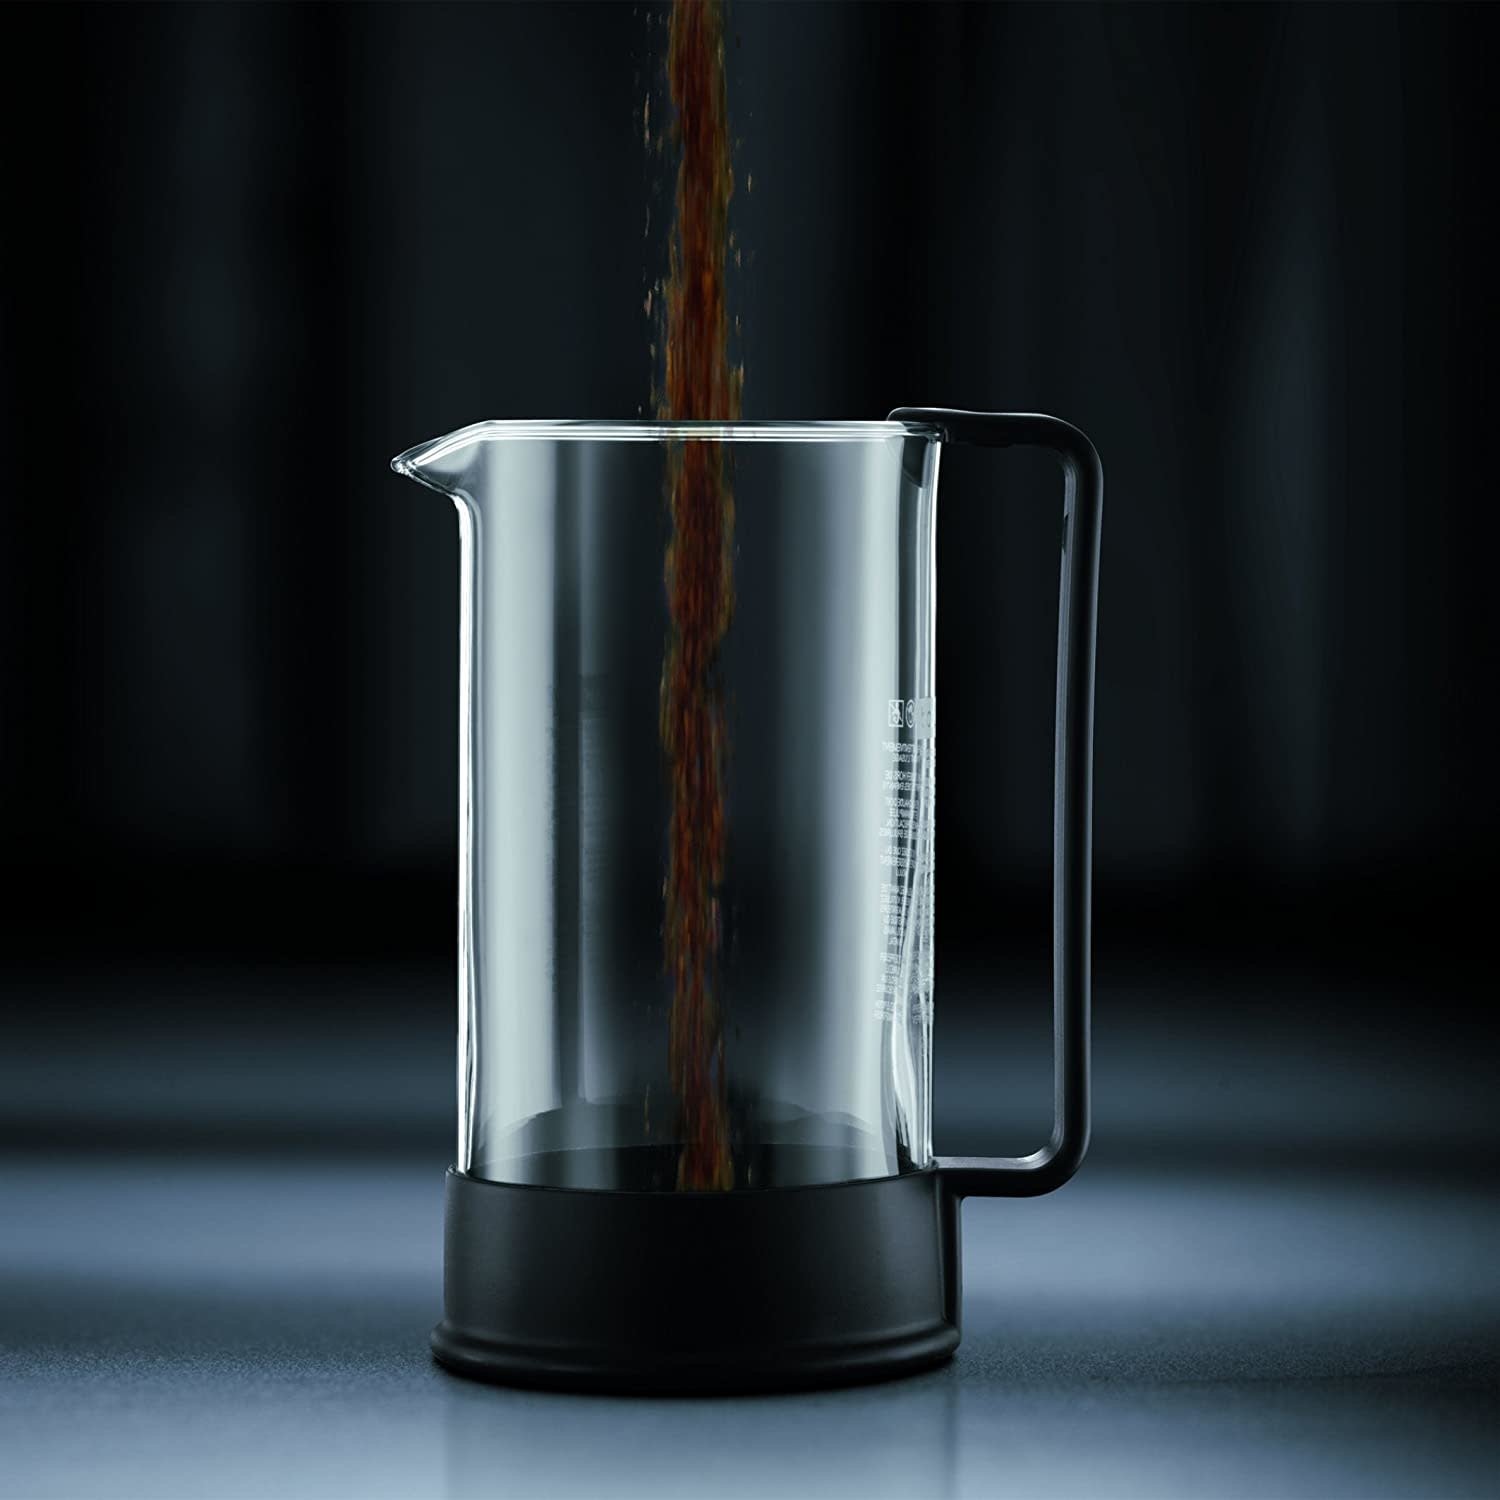 Bodum Pour Over 8-Cup Coffee Maker - Glass